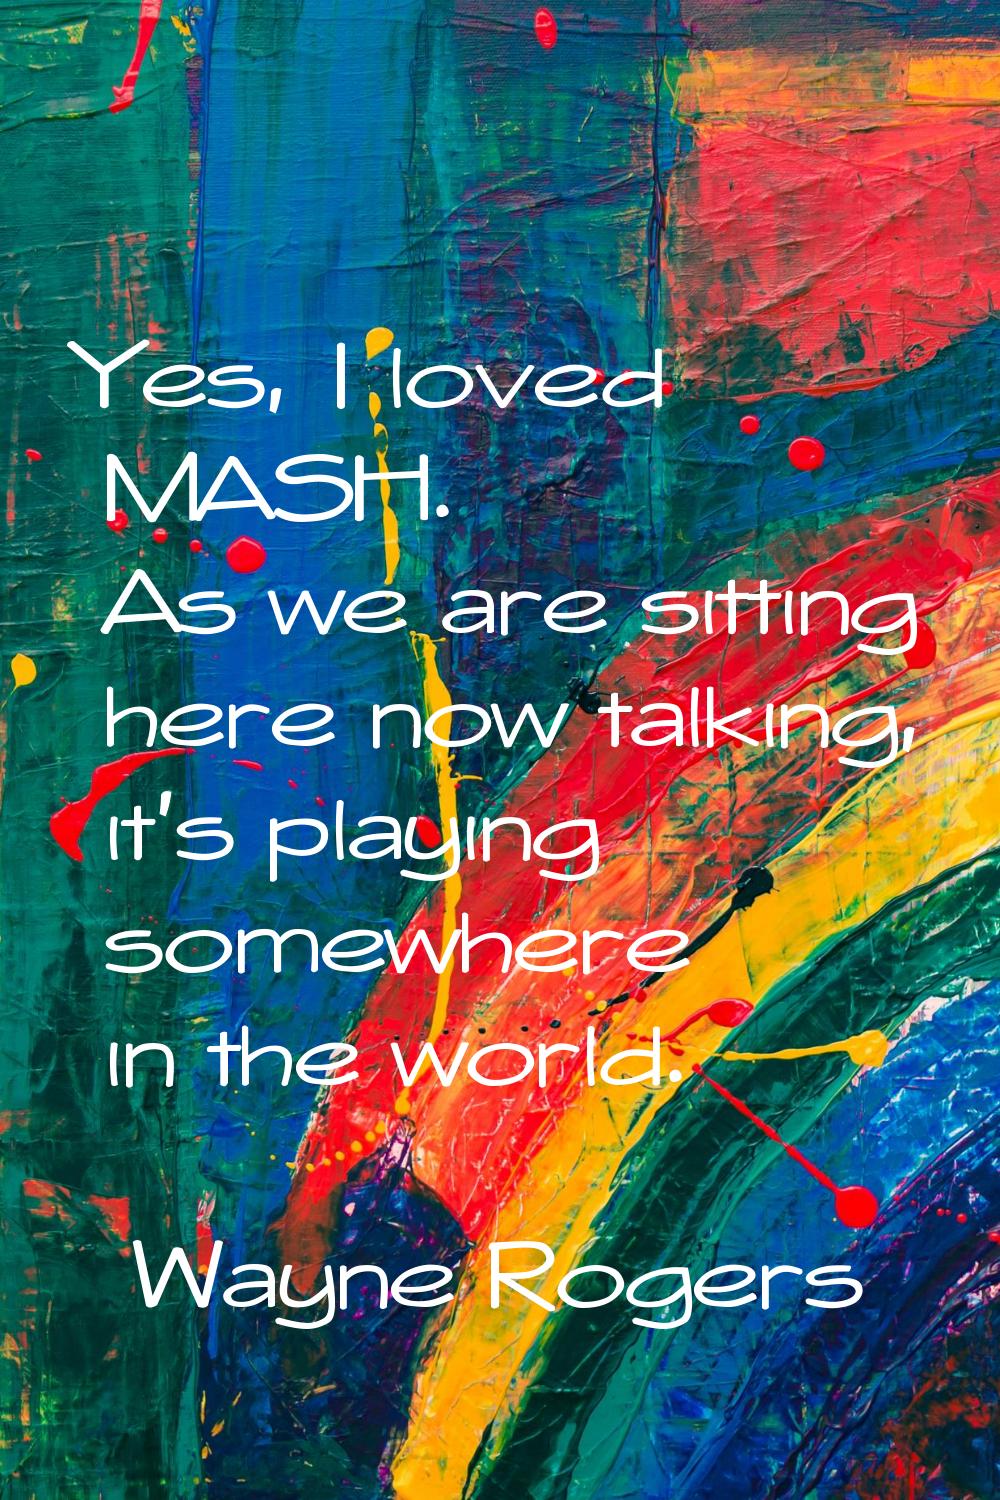 Yes, I loved MASH. As we are sitting here now talking, it's playing somewhere in the world.